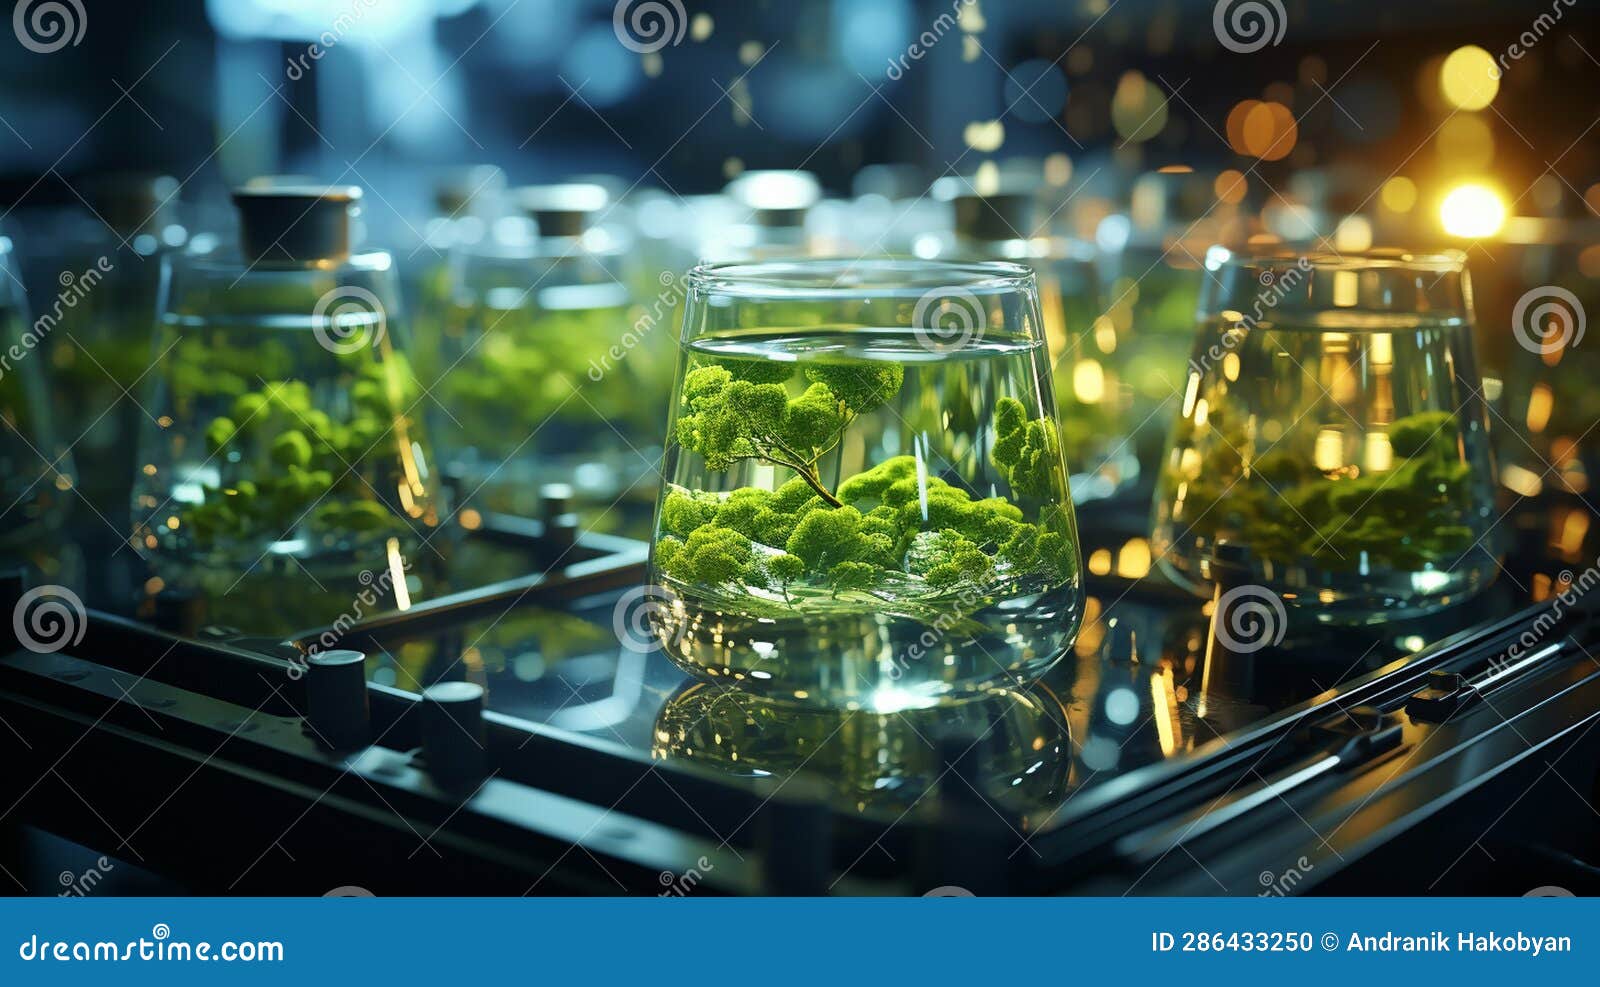 Microalgae Cartoons, Illustrations & Vector Stock Images - 114 Pictures ...